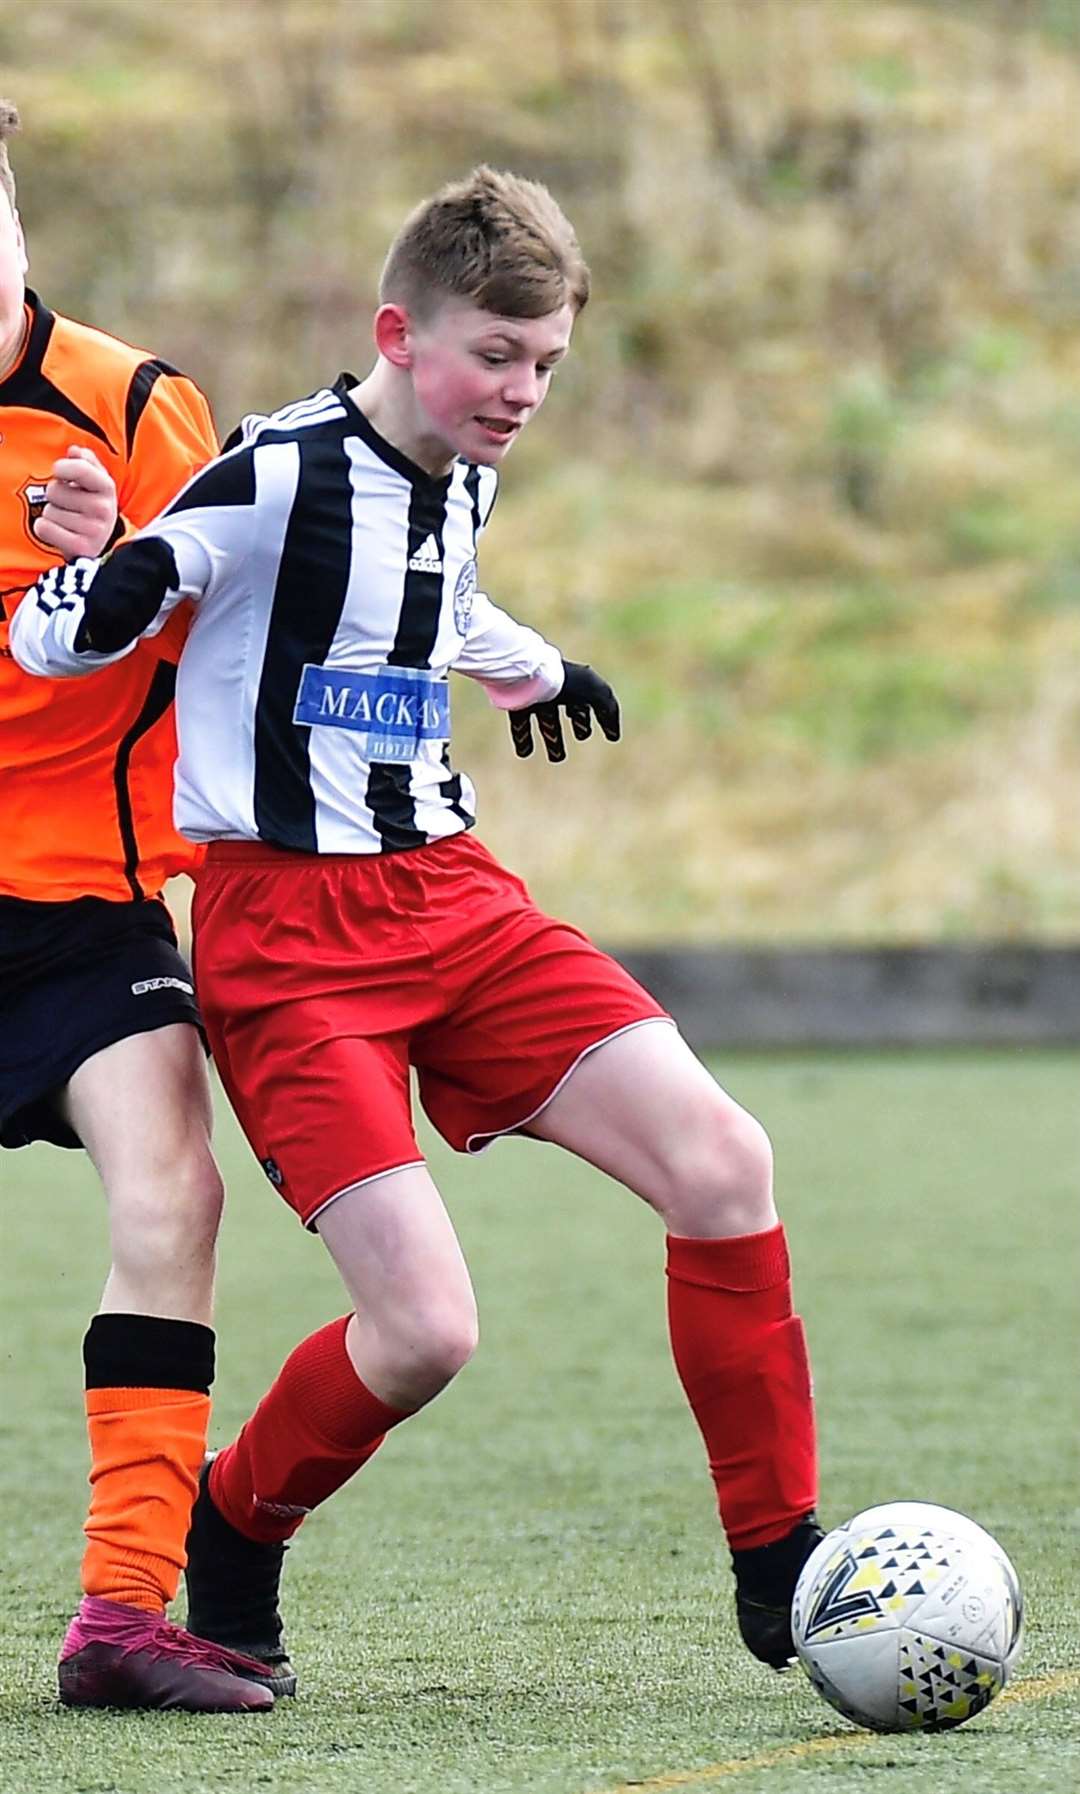 Scott Durrand grabbed a hat-trick for Caithness United U15s in their convincing win against Dingwall.